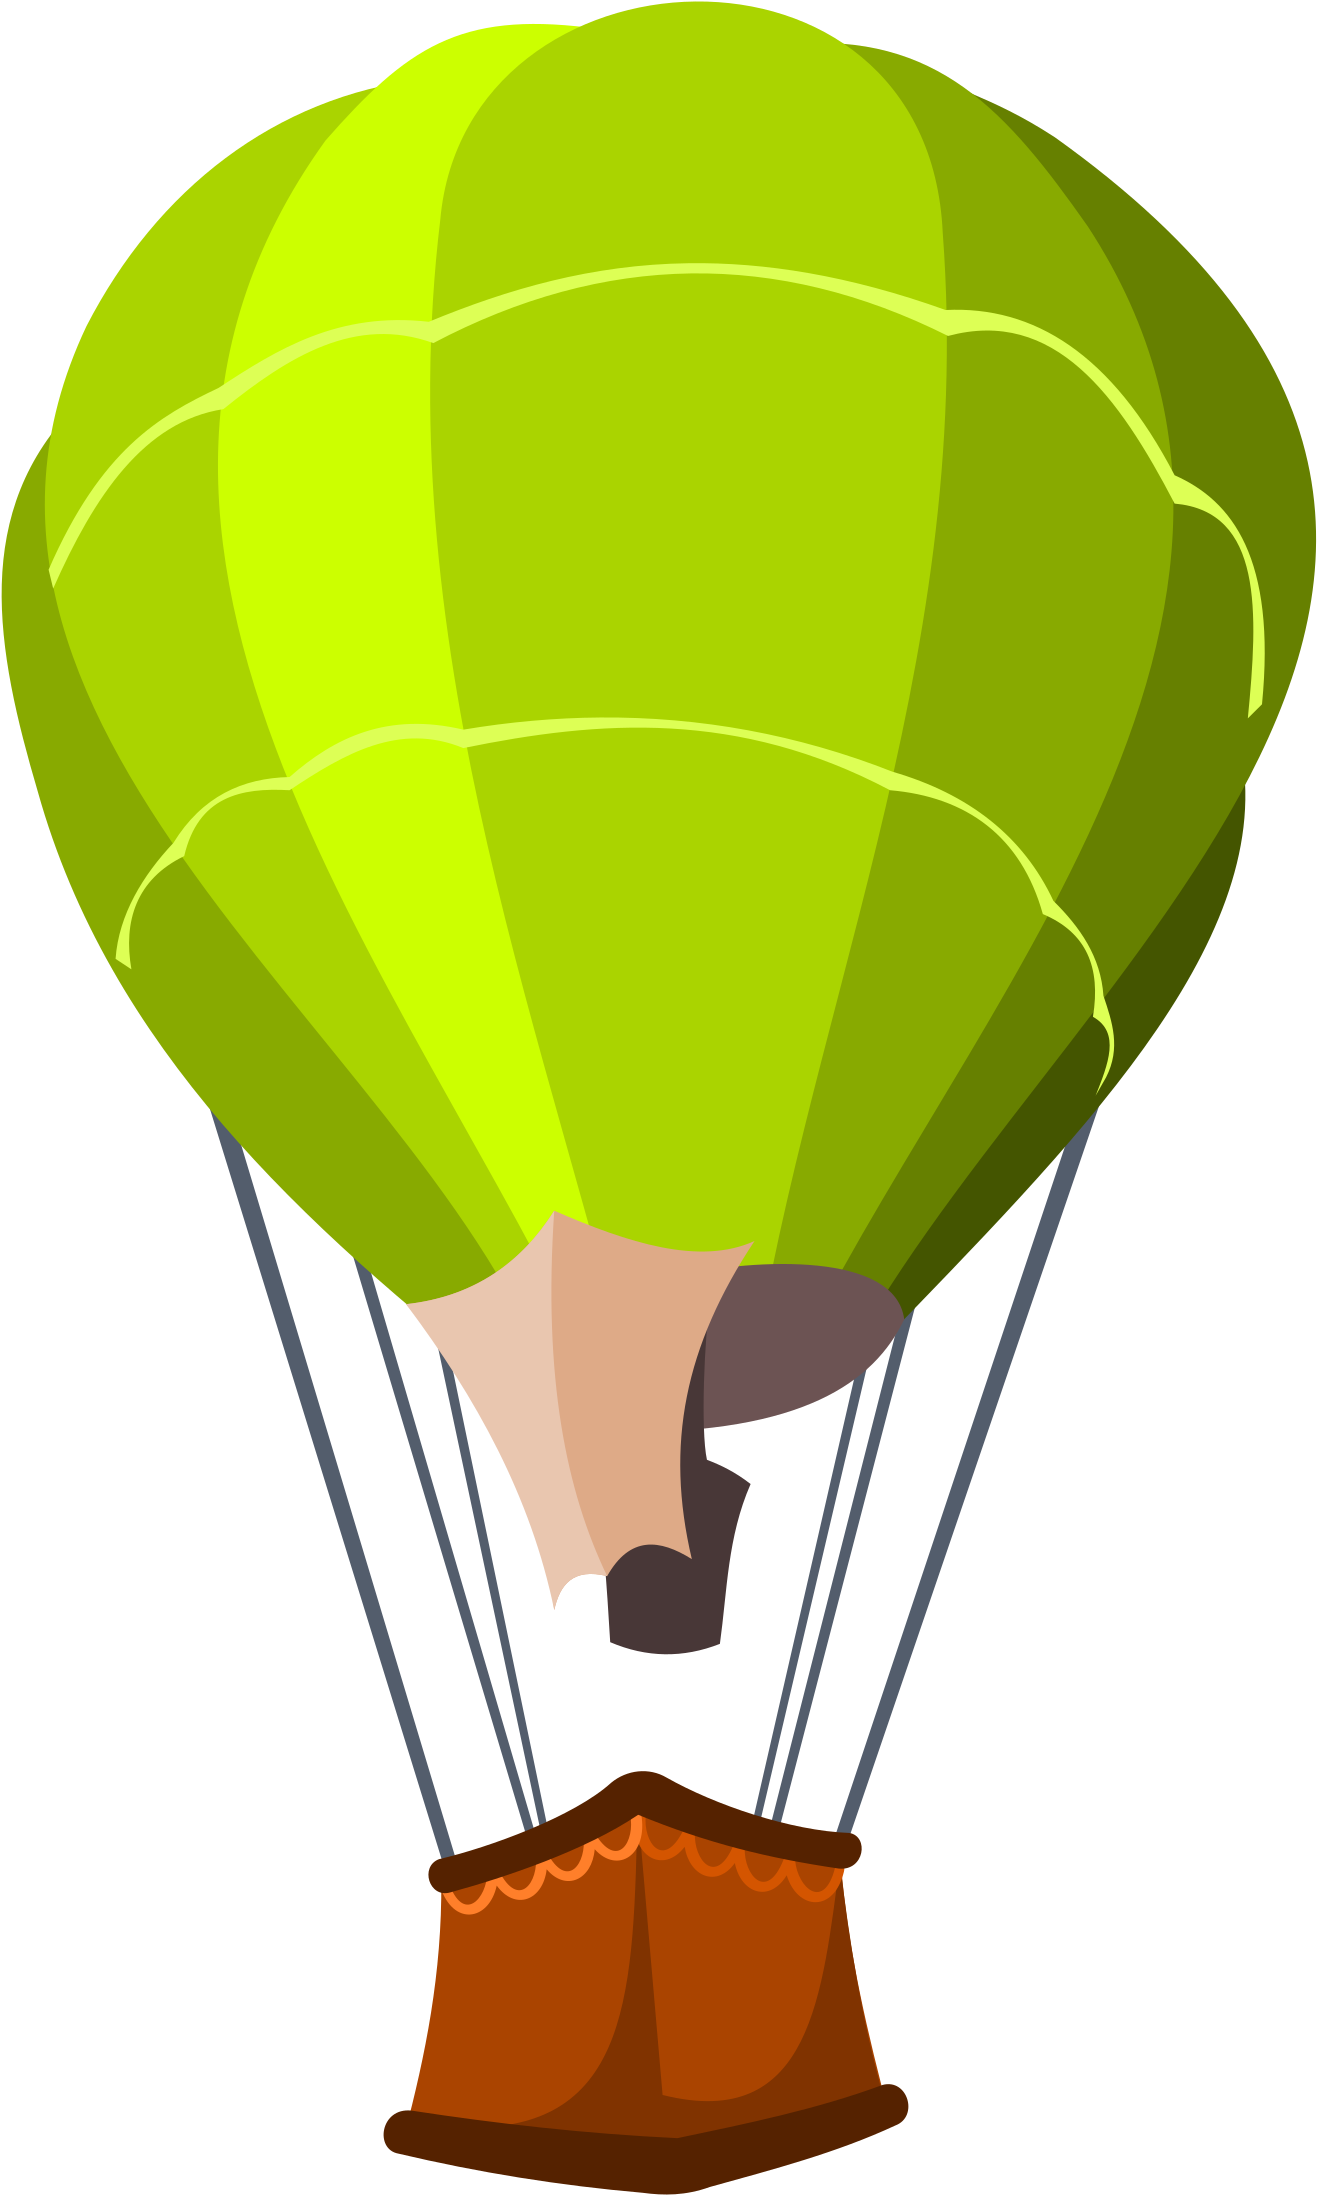 Air-baloon - Different Means Of Air Transport (1440x2400)